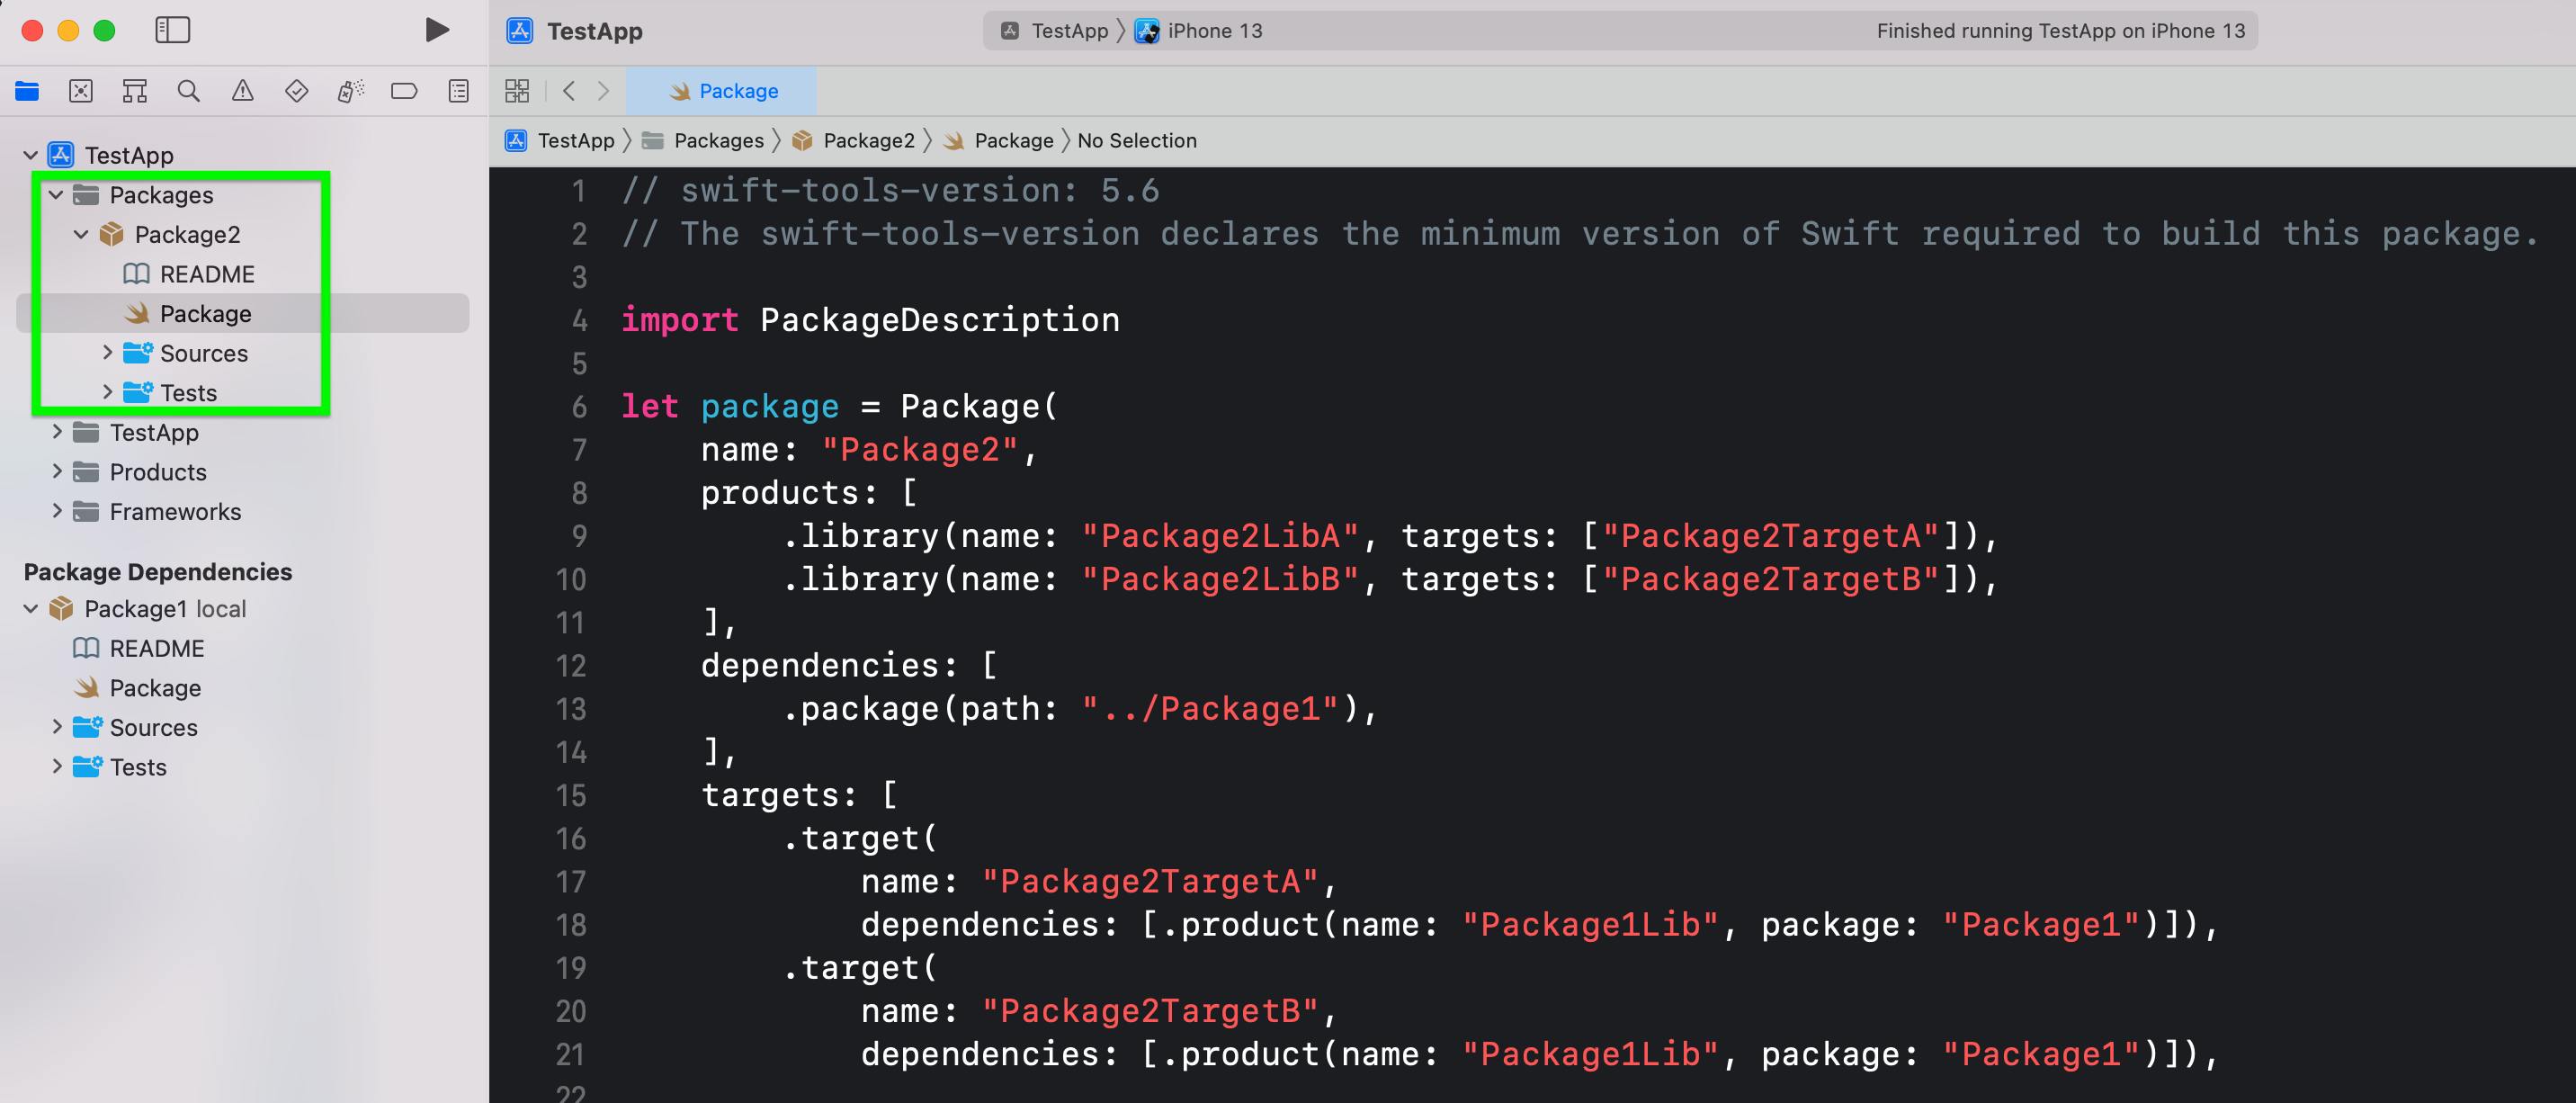 You add a package to your Xcode project